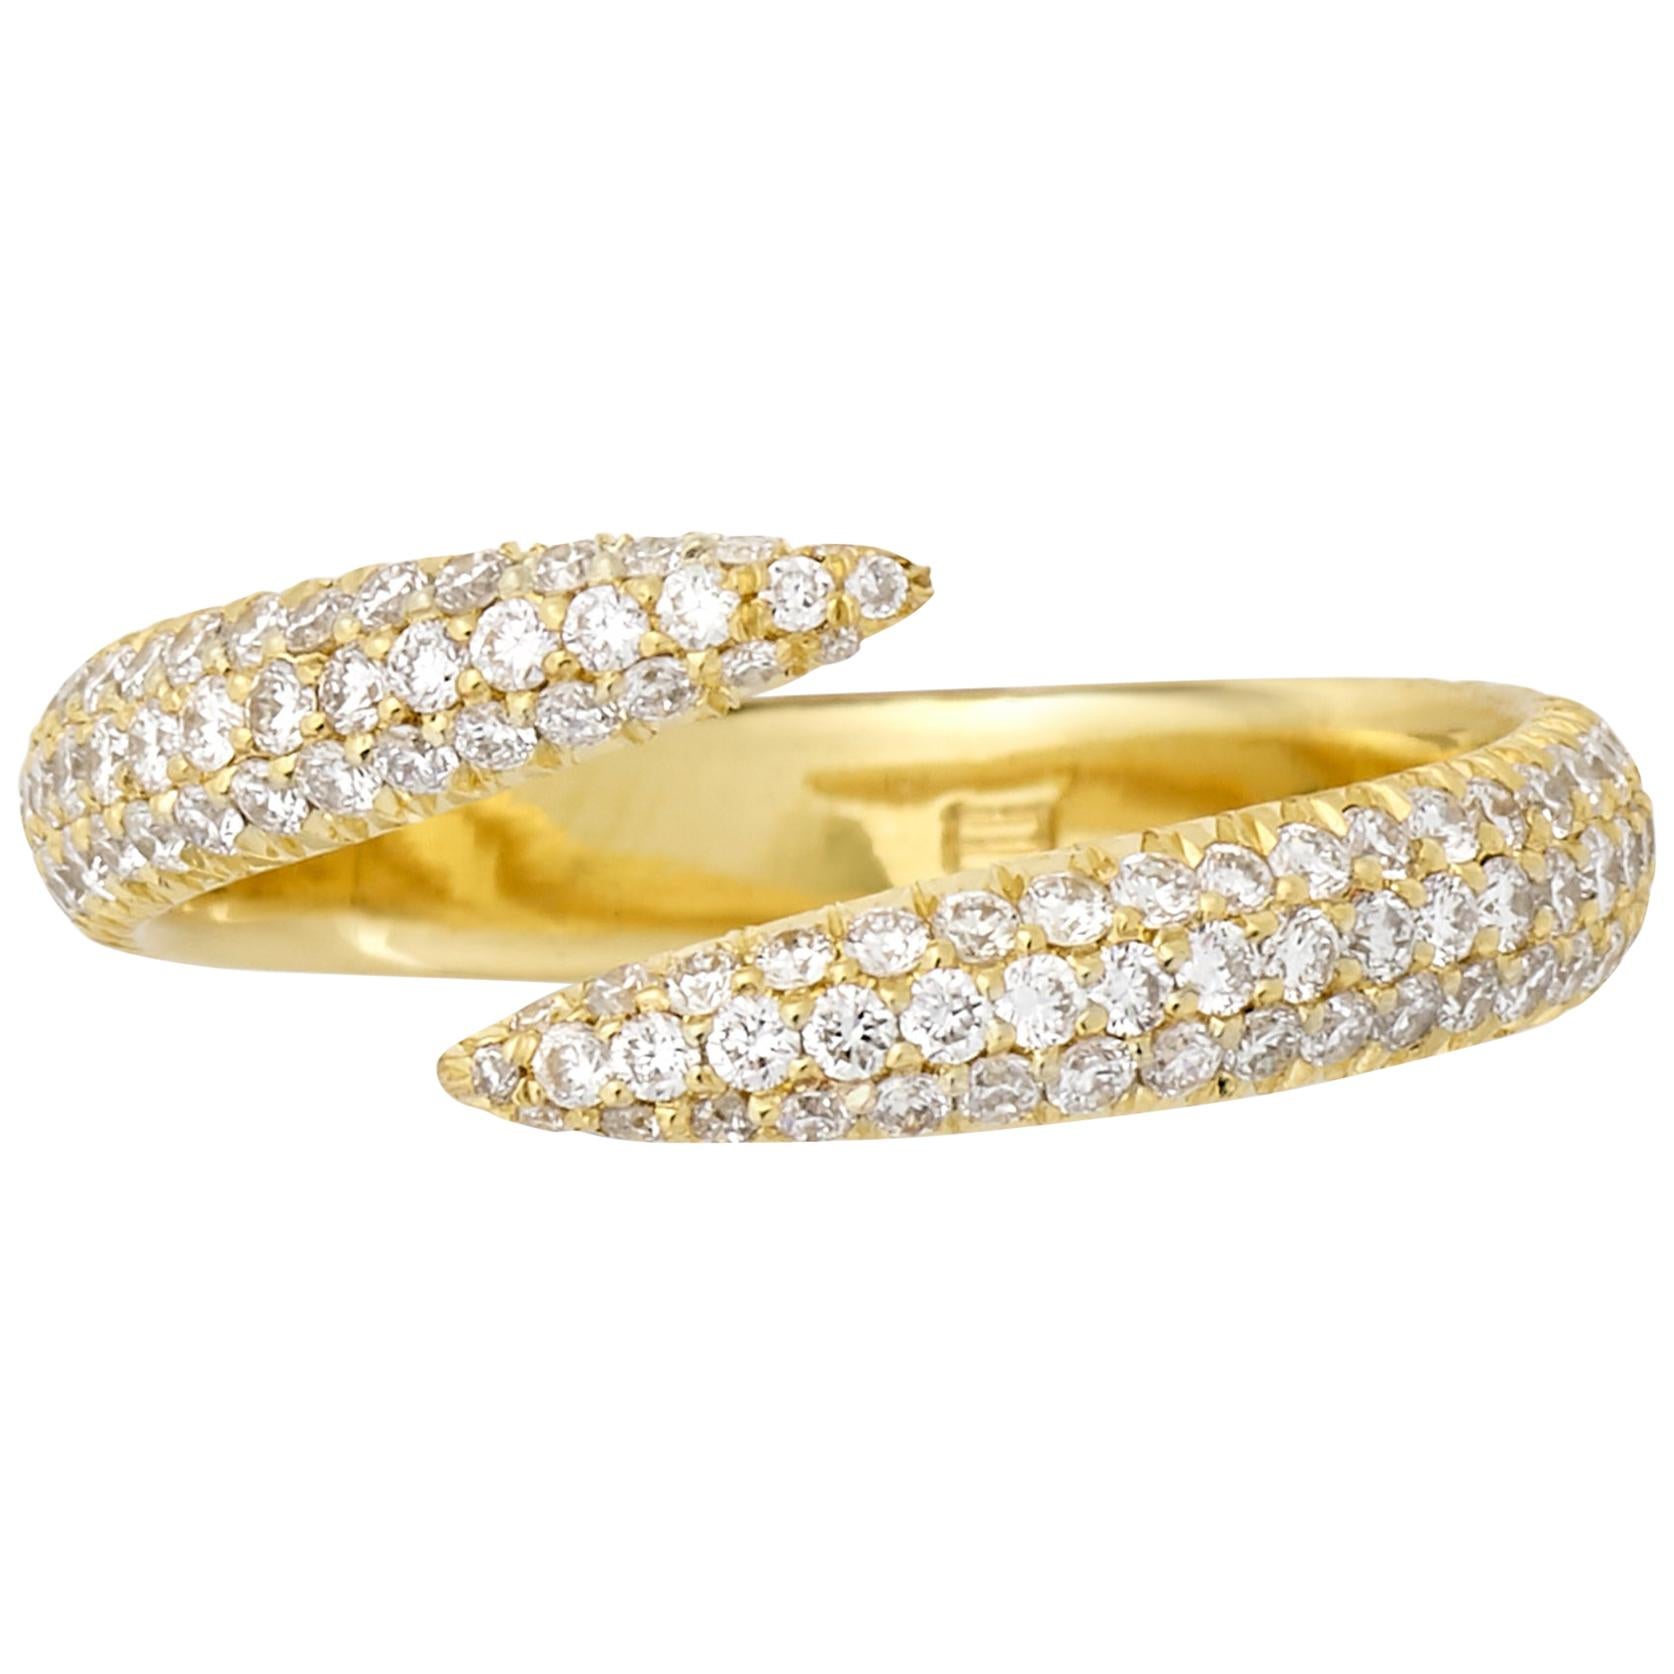 Eva Fehren Pave Wrap Claw Ring in 18 Karat Yellow Gold Pale Champagne Diamonds For Sale